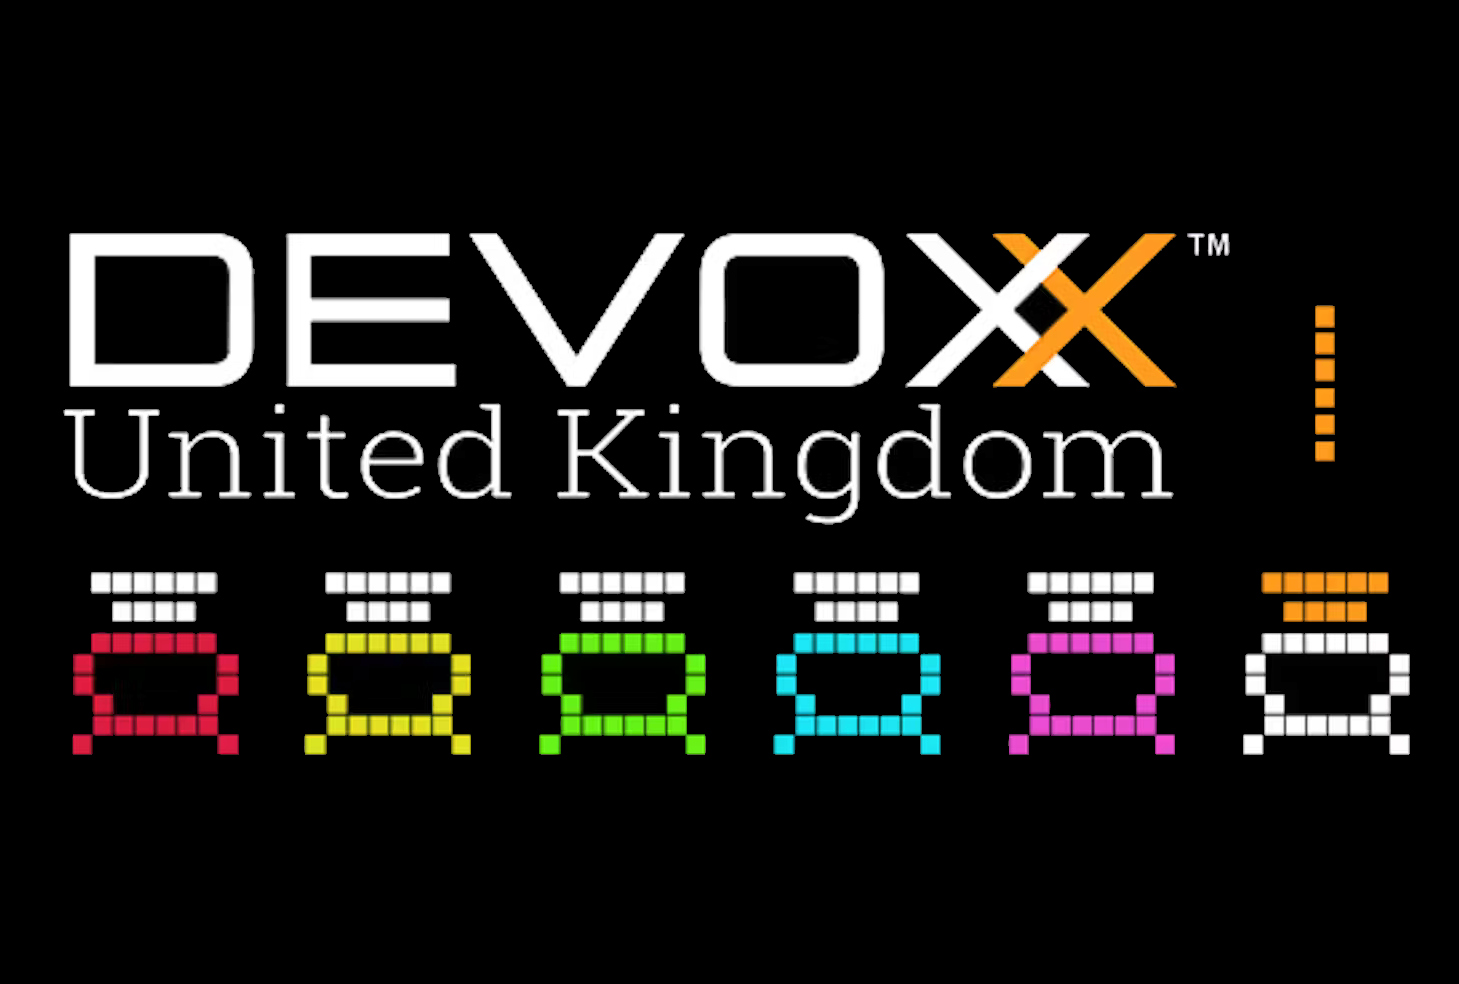 A cover photo featuring the logo of Devoxx UK, which includes some pixel art in the style of space invaders